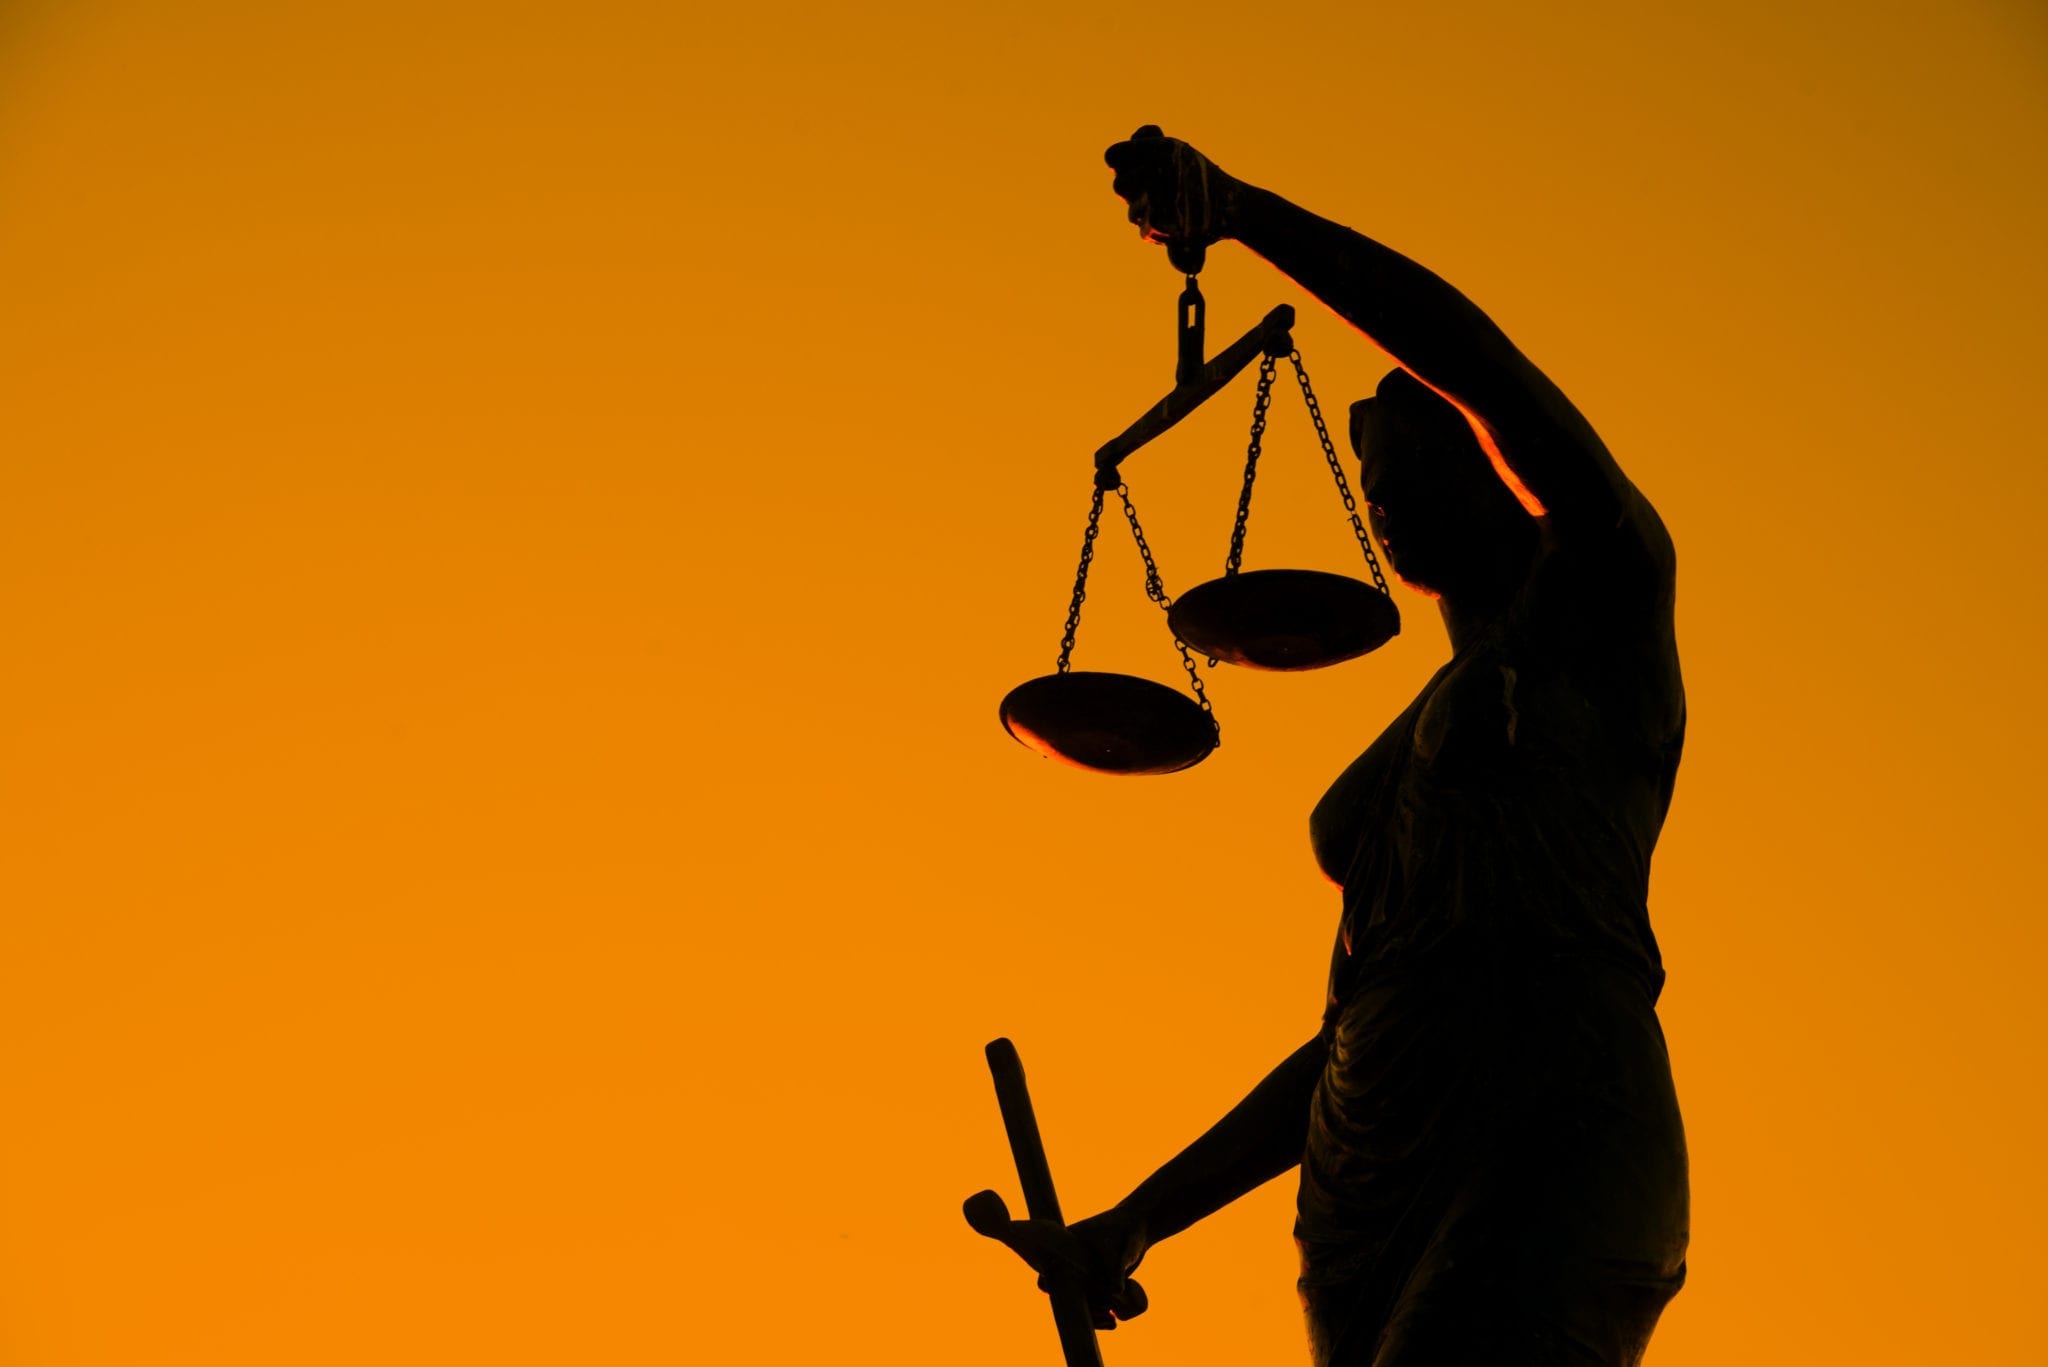 Statue holding scales of justice on an orange background